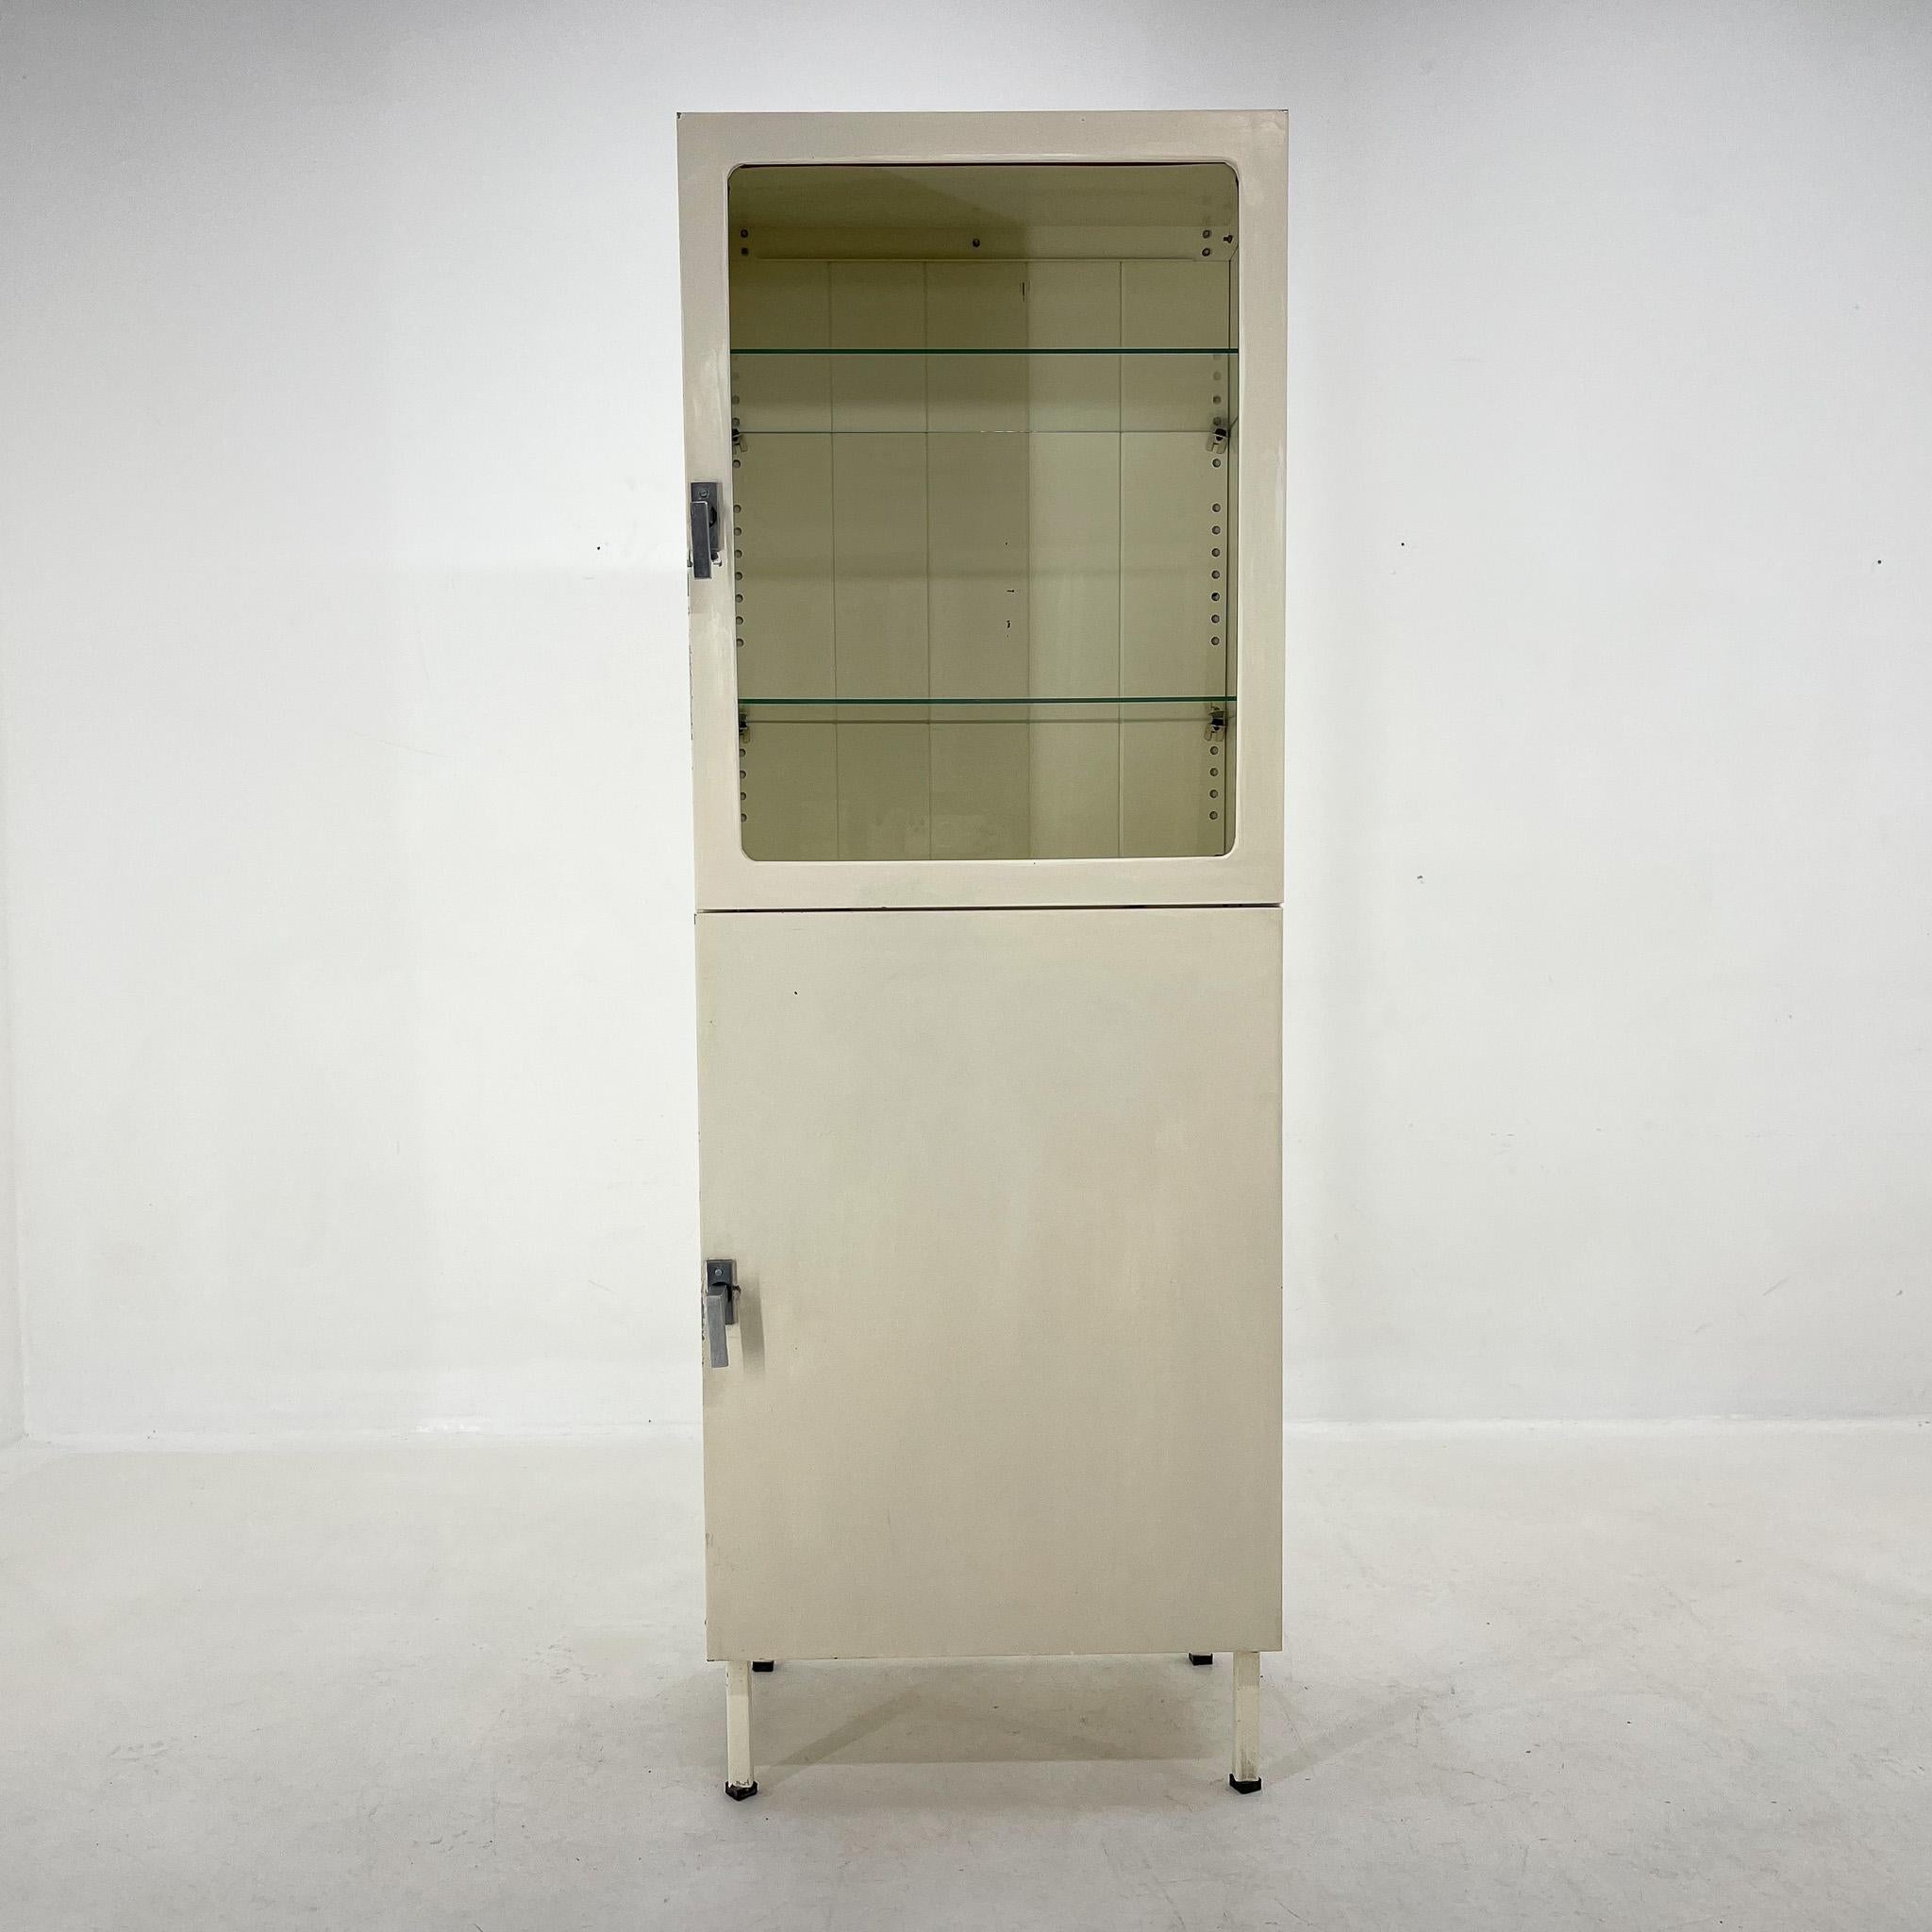 Iron and glass medical cabinet, made in the 1950's in former Czechoslovakia.